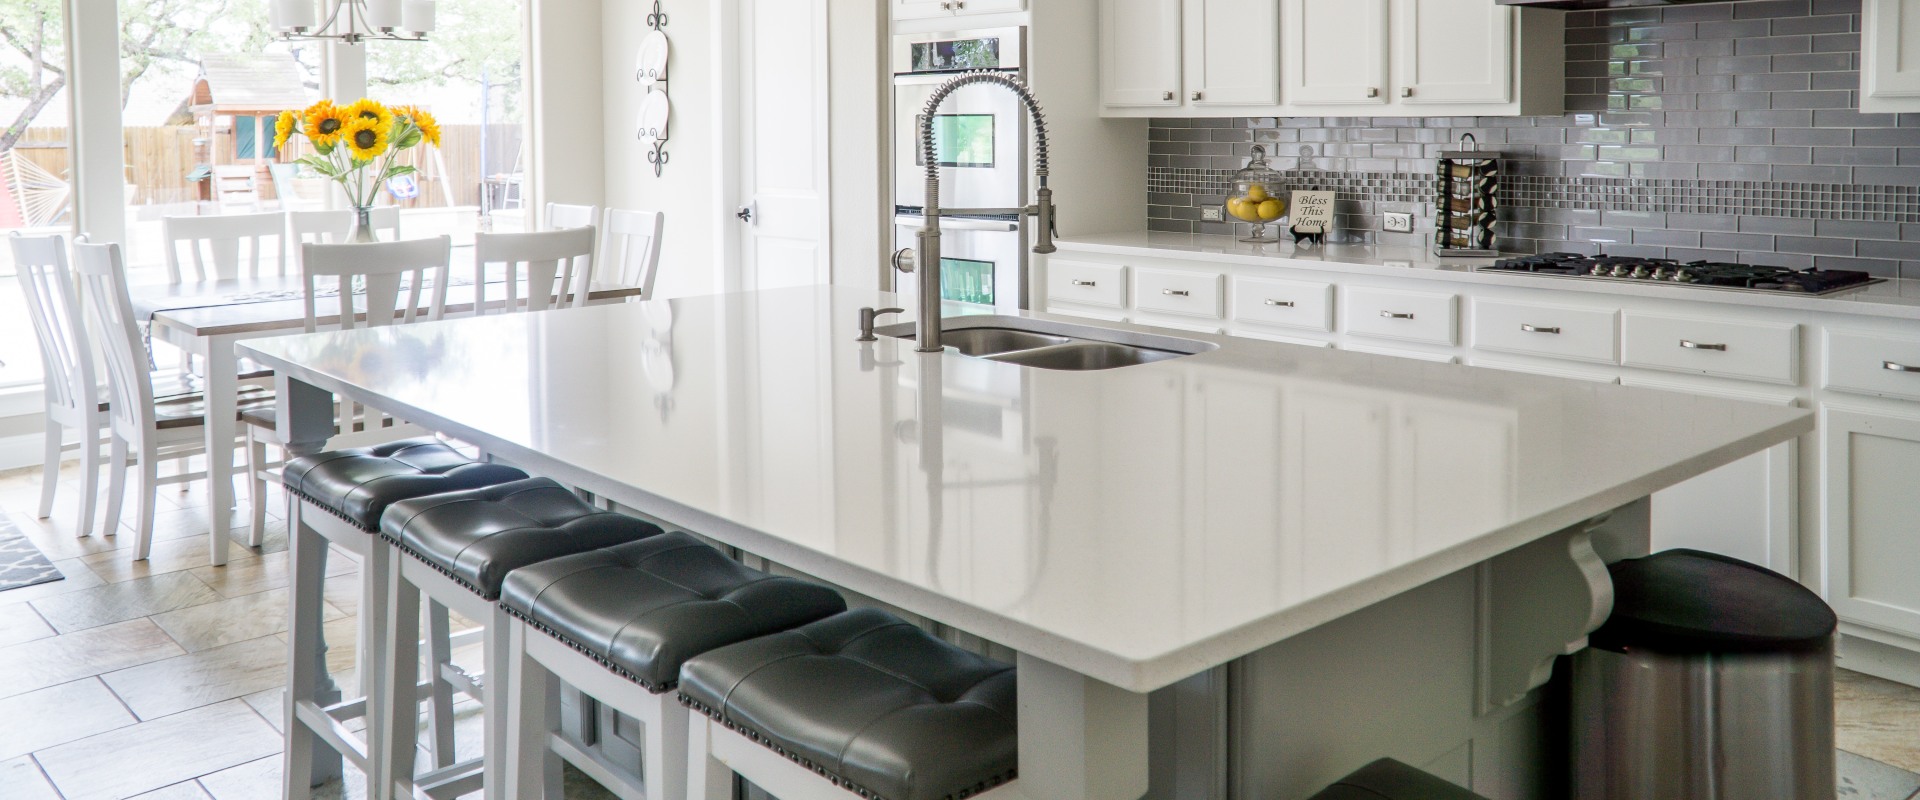 Expert Kitchen Remodel Services In Arizona: Gas Plumbing Included